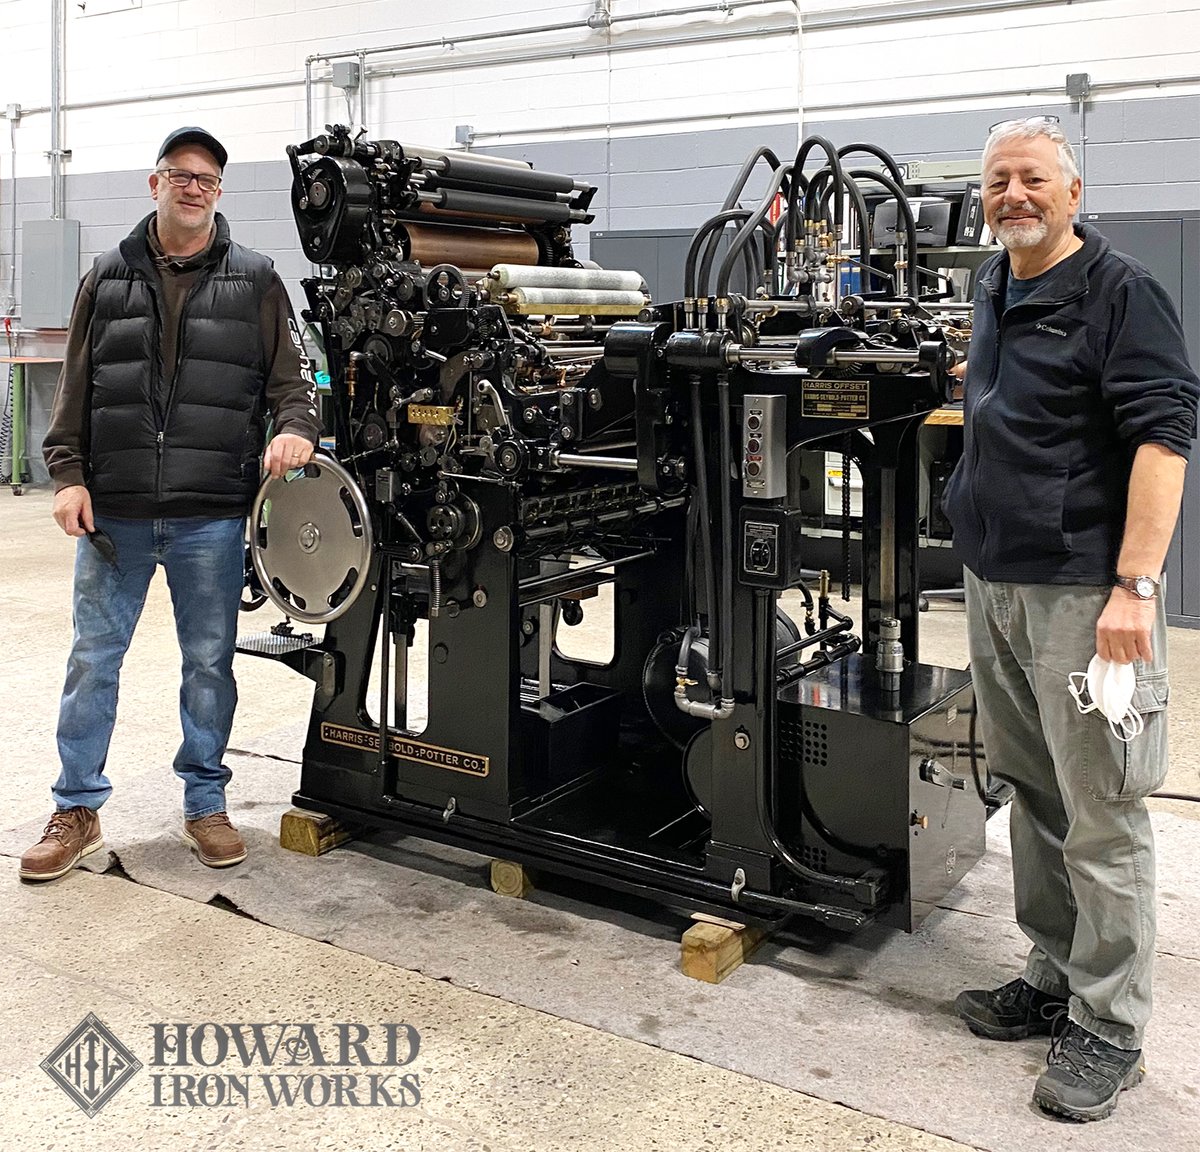 A lovely visit from a friend. Thanks again, Tim Treloar (left), #ImageFour for your support and the plates - much appreciated.
#Harris #Seybold #Potter #offset #offsetpress #printingplate #printinghistory